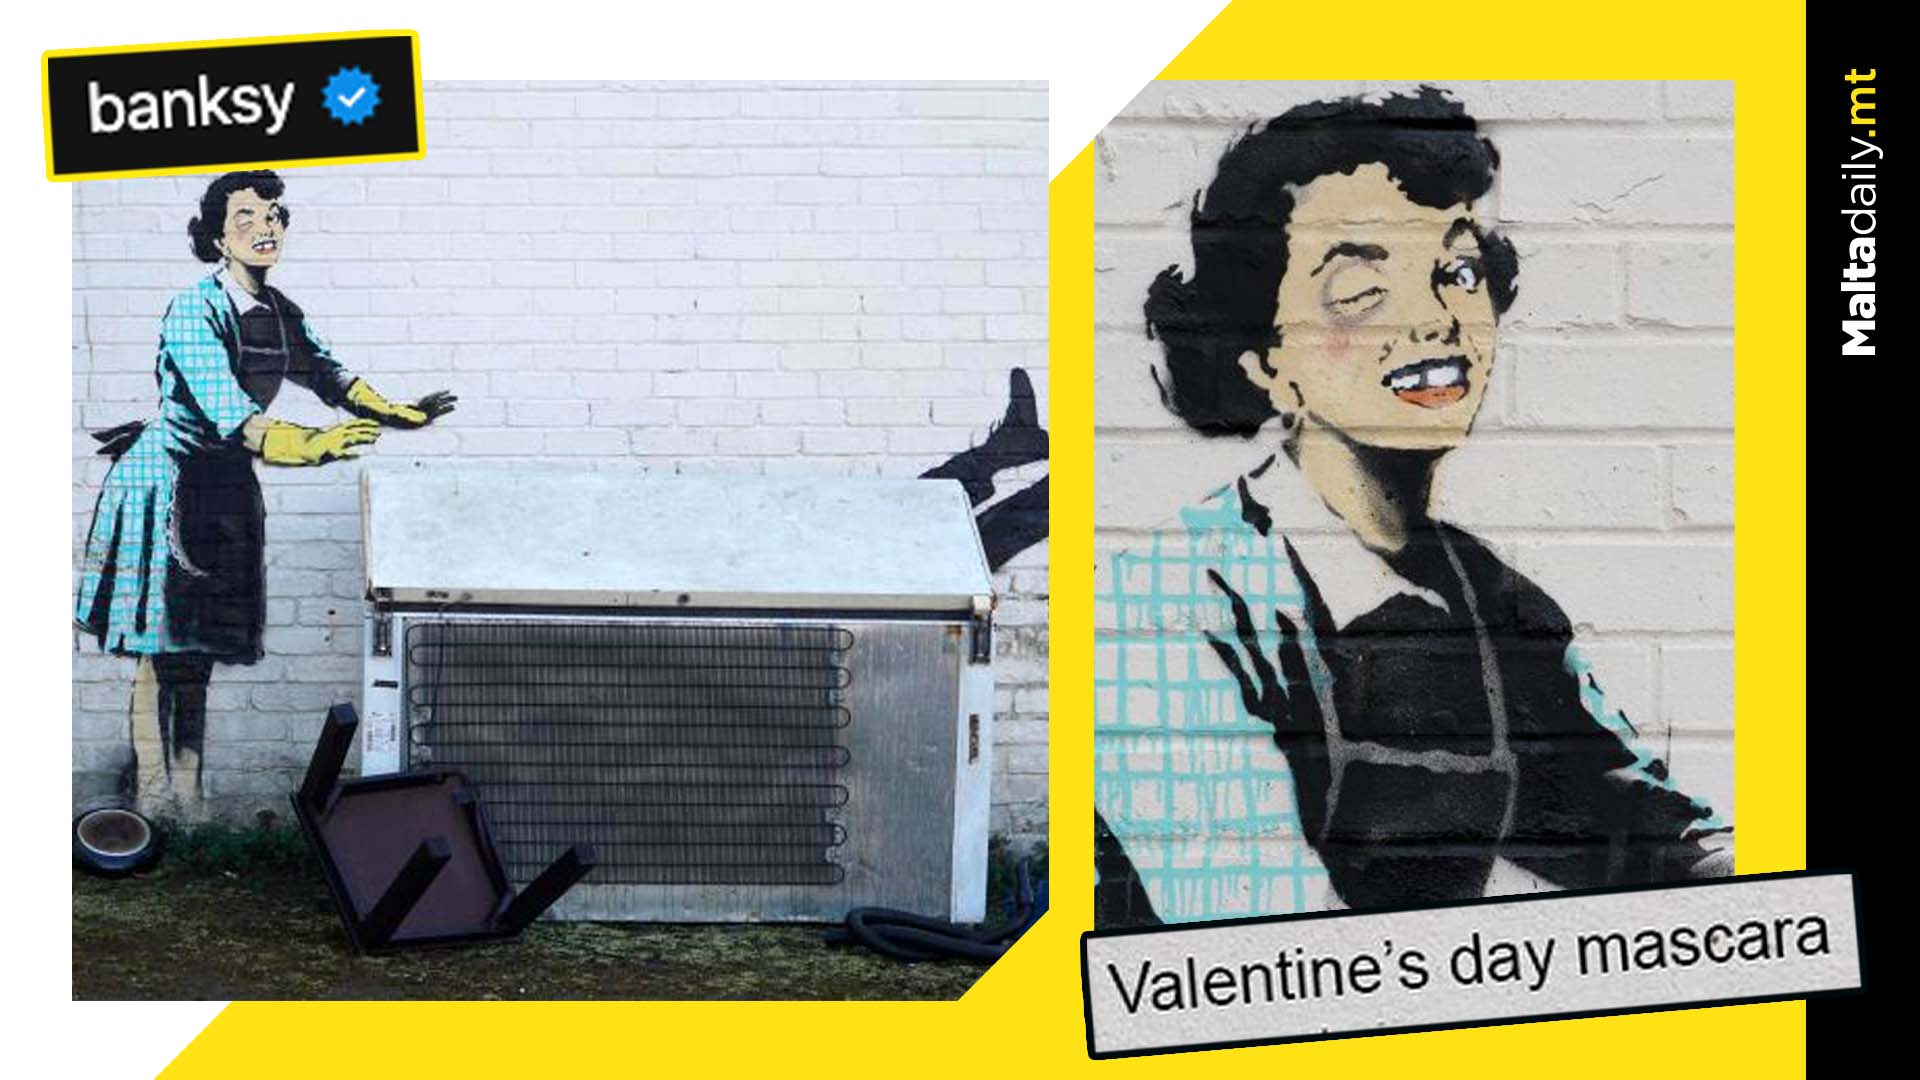 Banksy tackles domestic violence with Valentine's Day piece